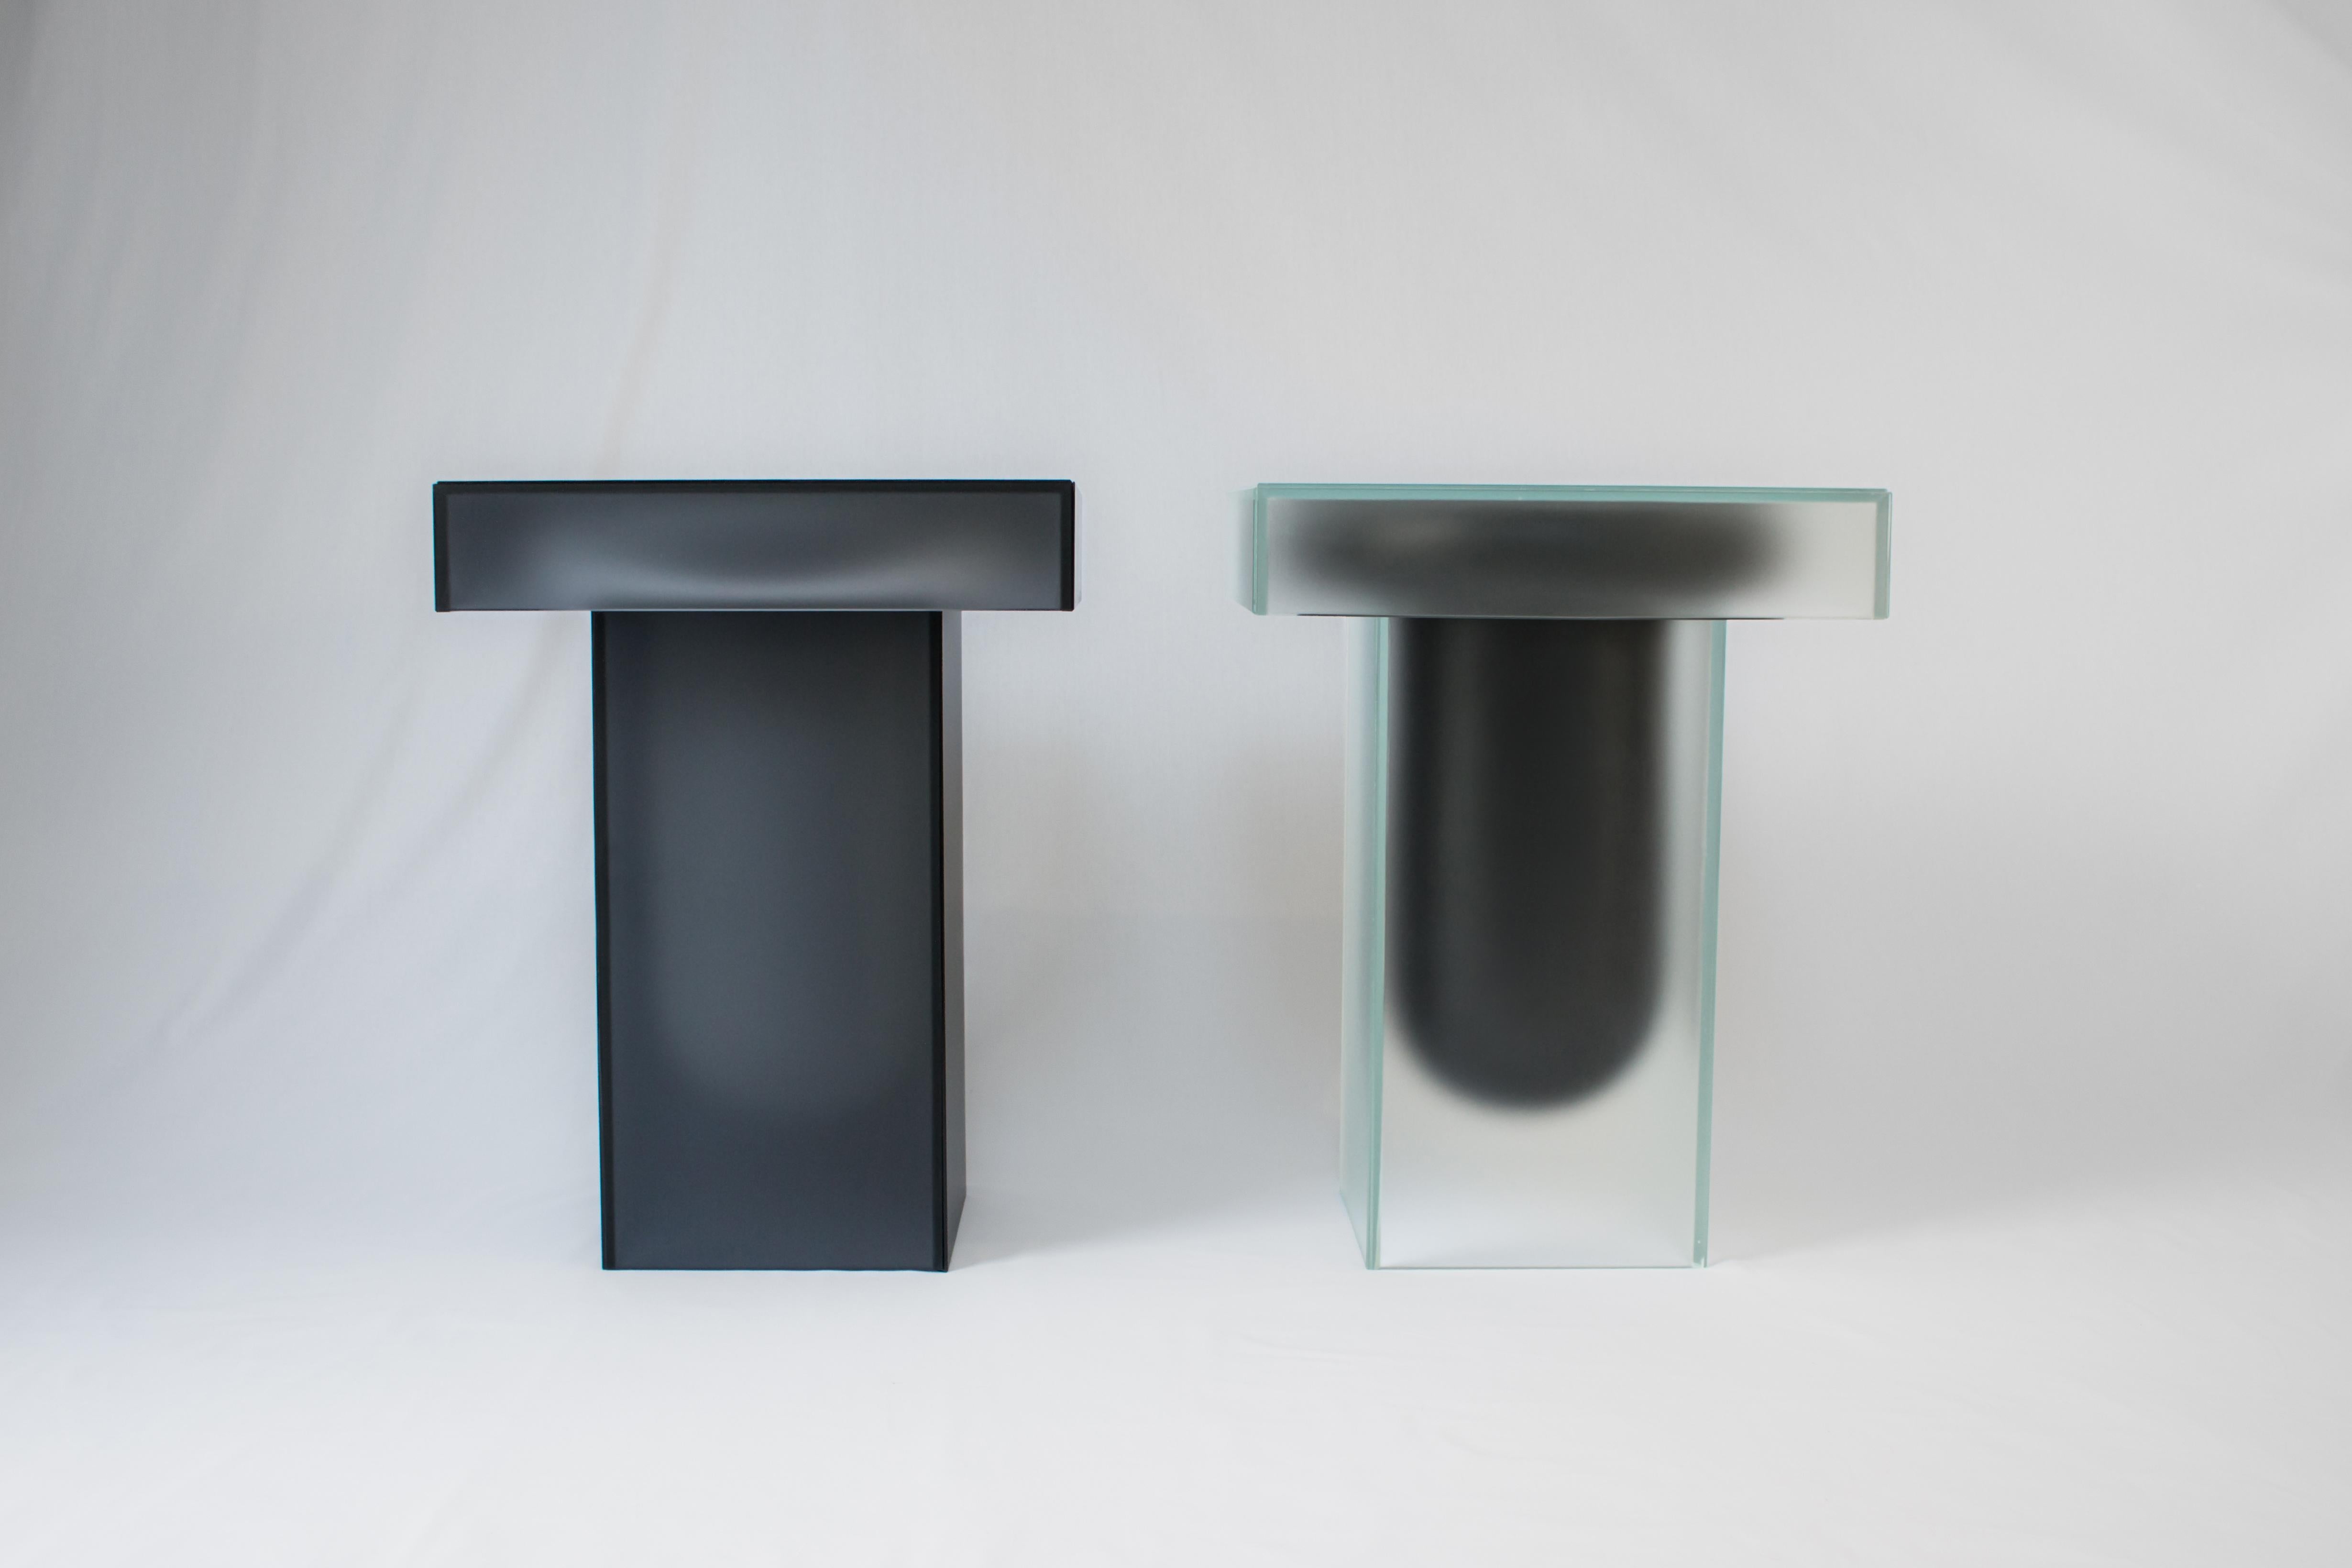 Editions 01, 02, 03, 04
Open Edition Encased Furniture Series.

Containa is an encased furniture series that explores the narrative of the vessel and its contents. 

Editions 01, 02, 03 + 04 focus on an organic, sculptural, wood-turned form,